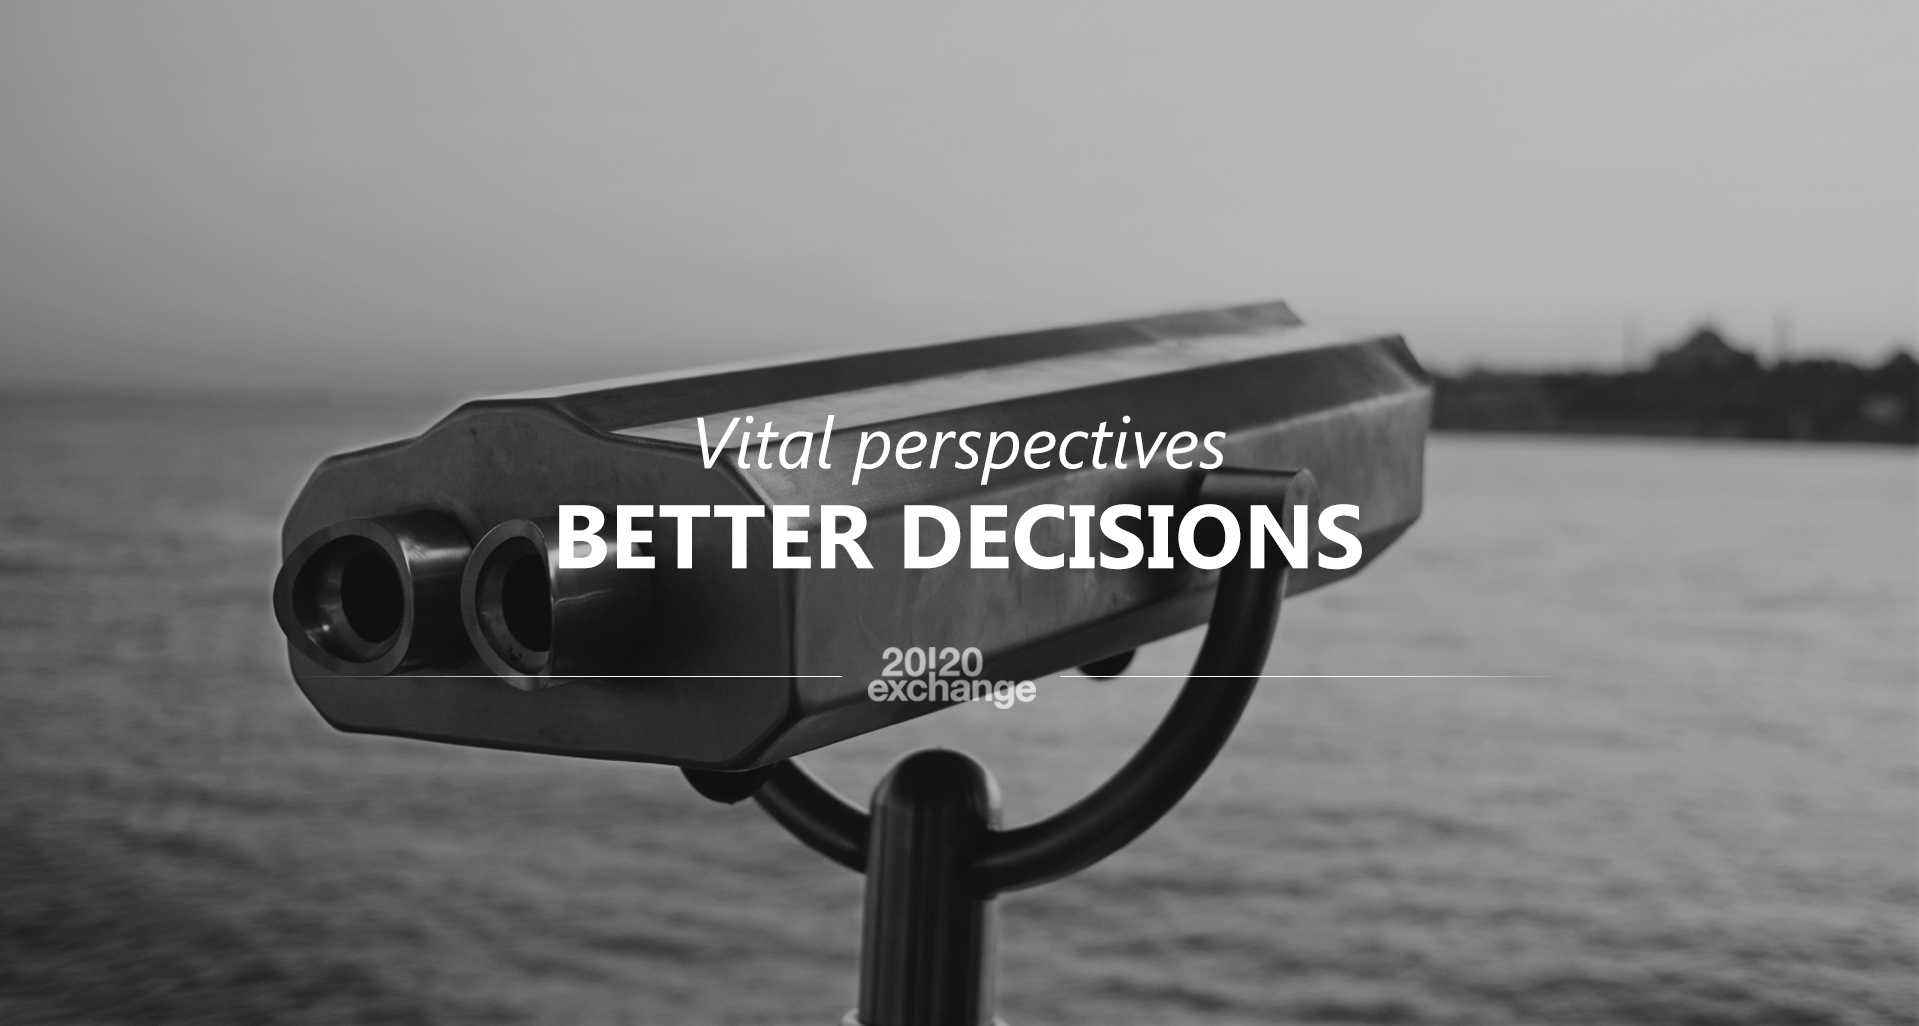 2020 Exchange - vital perspectives better decisions